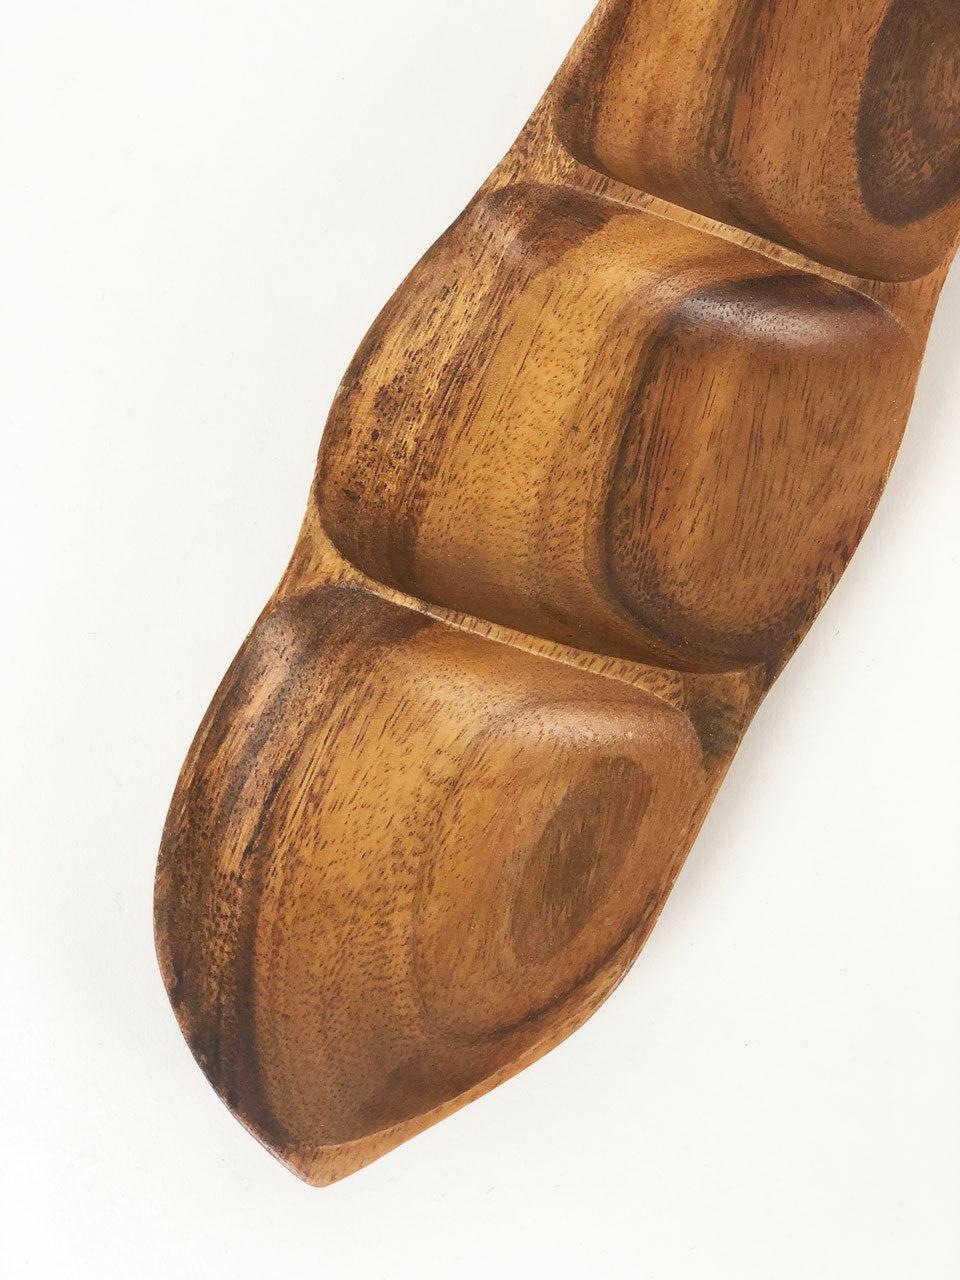 Teak bowl with three compartments